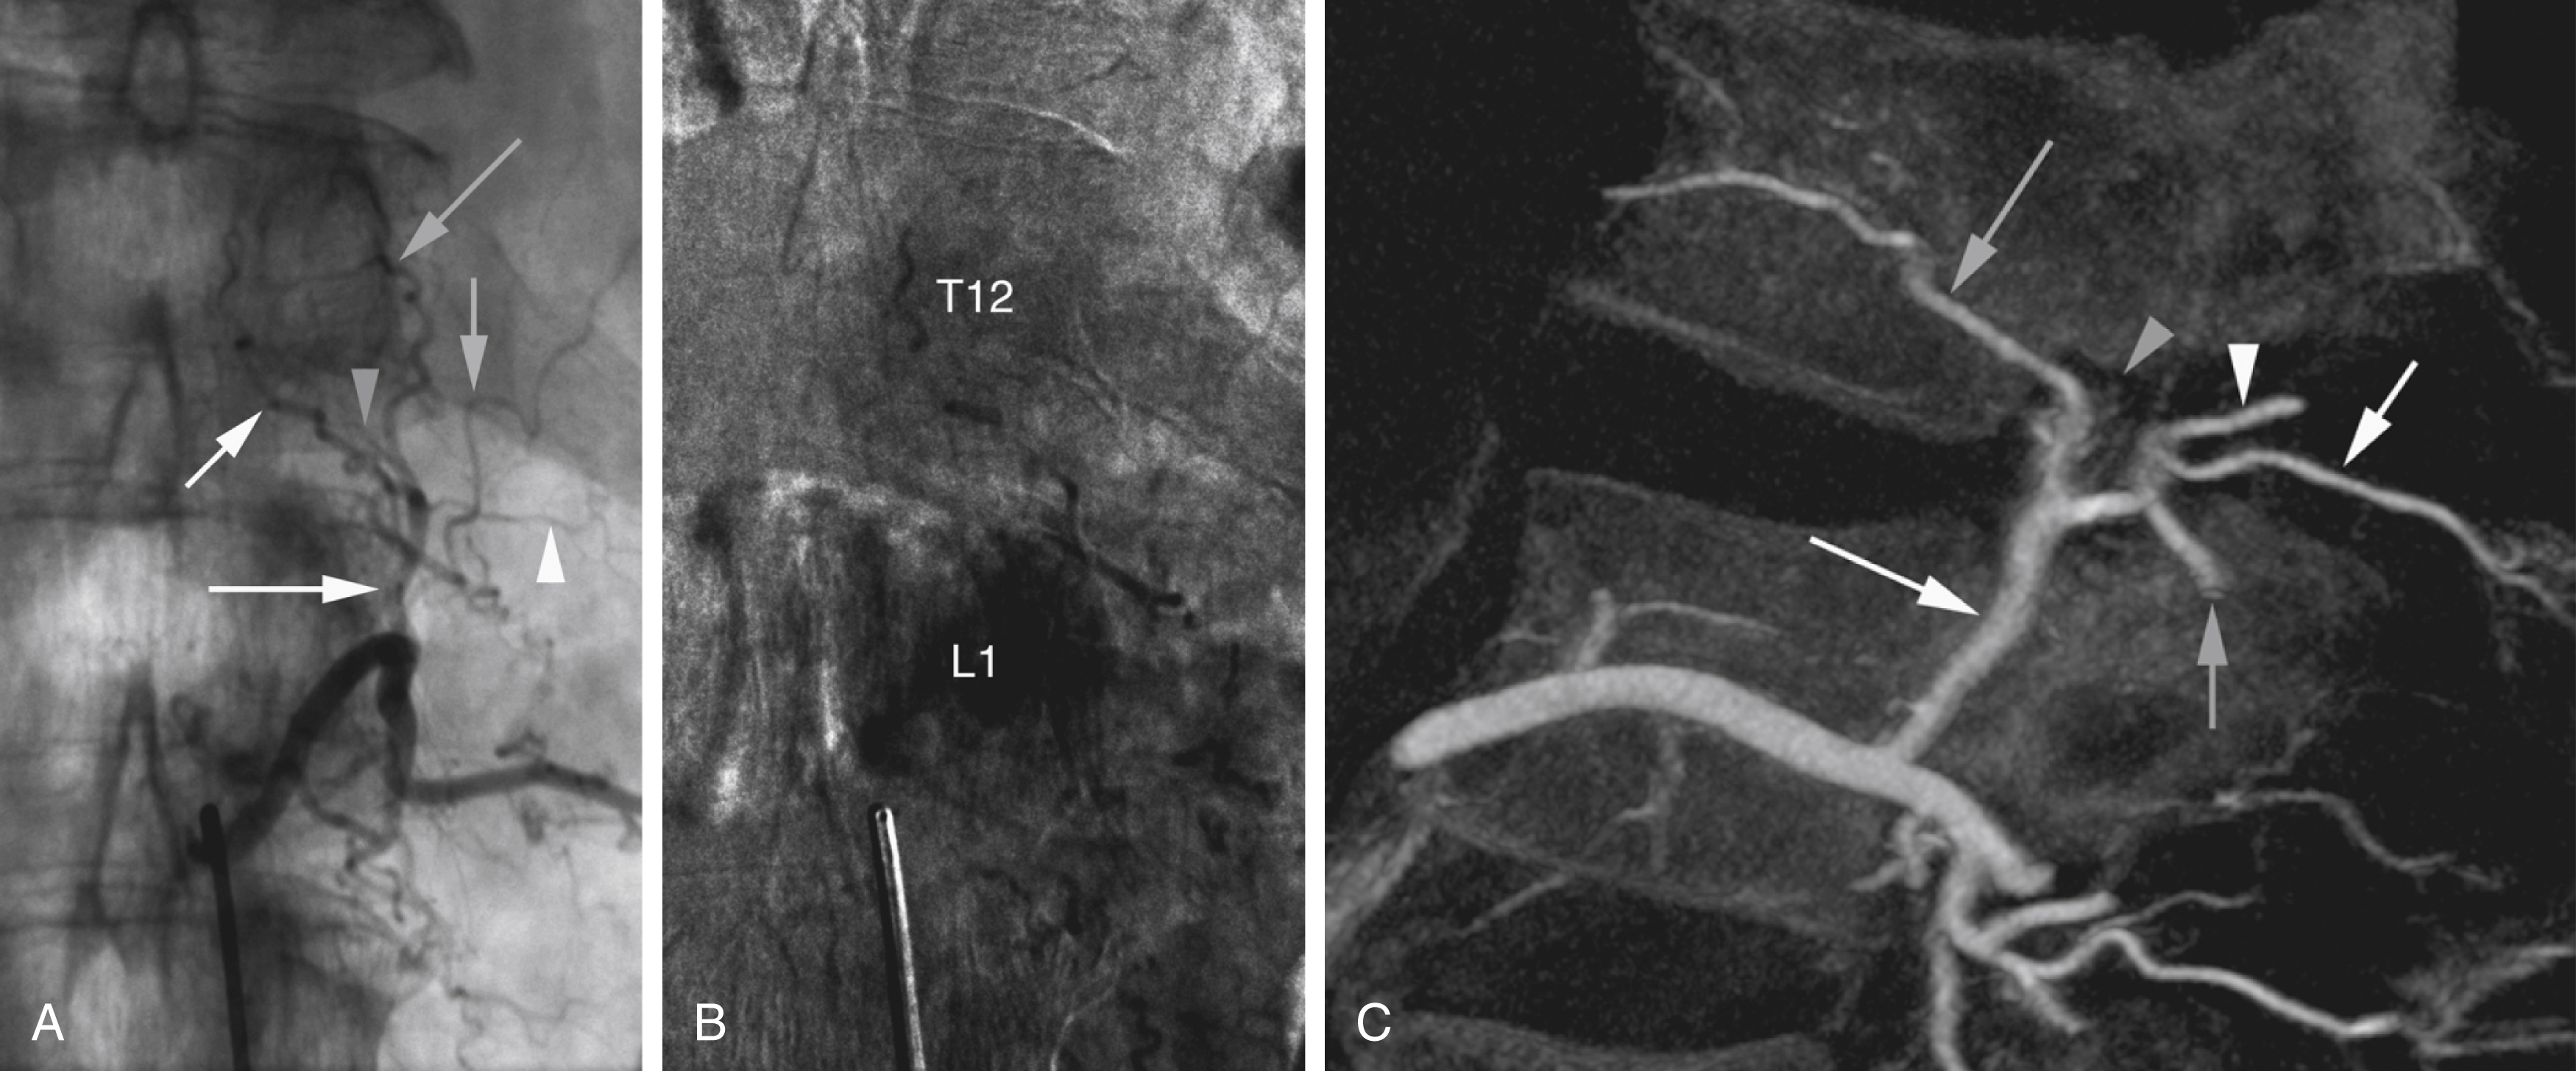 Fig. 57.19, Complete ipsilateral trunk for L1 and T12. (A) Left L1 injection, with concomitant opacification of various structures at T12: branch running anteriorly along lateral aspect of T12 vertebral body ( long gray arrow ), corresponding to left T12 stem; left T12 dorsal branch with its musculocutaneous arteries ( short white arrow ); left T12 spinal branch ( gray arrowhead ); and small lateral branch (i.e., left subcostal artery) ( white arrowhead ). These branches form a complete left T12 internal segmental artery (ISA), opacified via robust posterior laterovertebral anastomosis ( long white arrow ) that continues as inferior phrenic artery ( short gray arrow ). (B) Capillary phase of injection, with parameters set to emphasize complete hemivertebral blushes at L1 and T12. (C) Sagittal flat-panel catheter angiotomography reconstruction confirms presence of complete T12 ISA, with its four components: stem ( long gray arrow ), spinal branch ( gray arrowhead ), dorsal branch ( short white arrow ), and lateral branch ( white arrowhead ), opacified by posterior laterovertebral anastomosis ( long white arrow ).